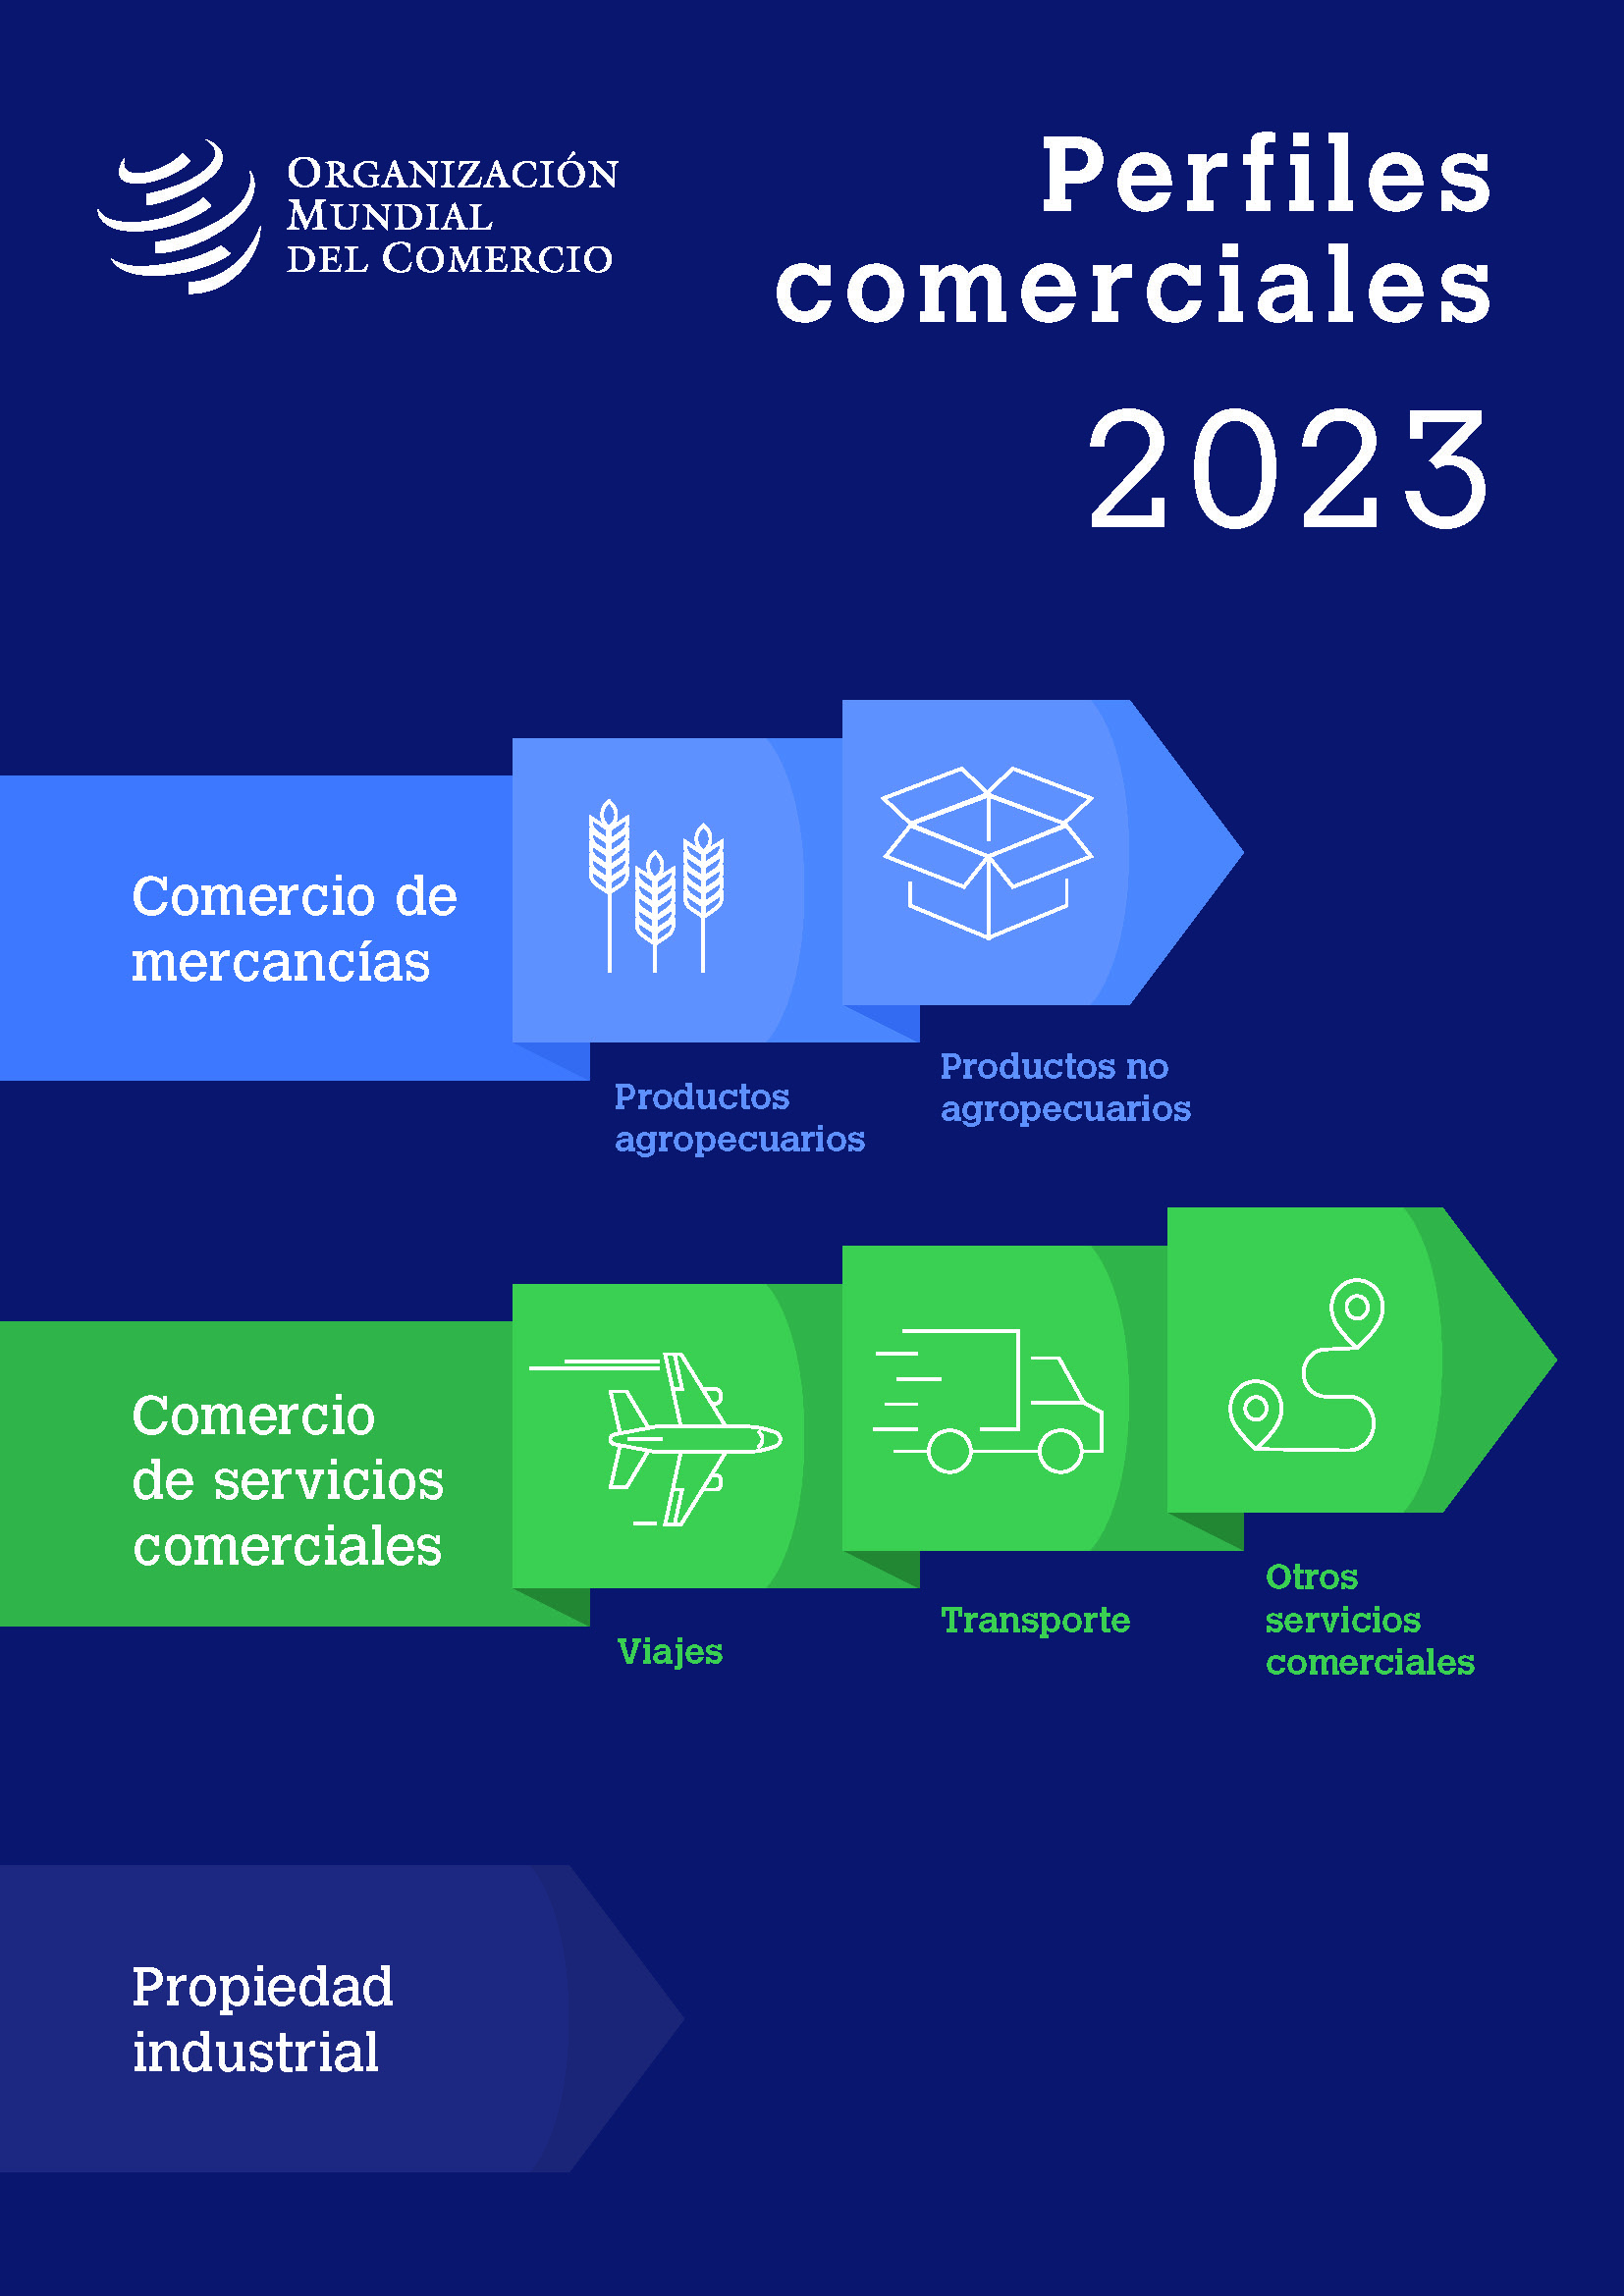 image of Perfiles comerciales 2023